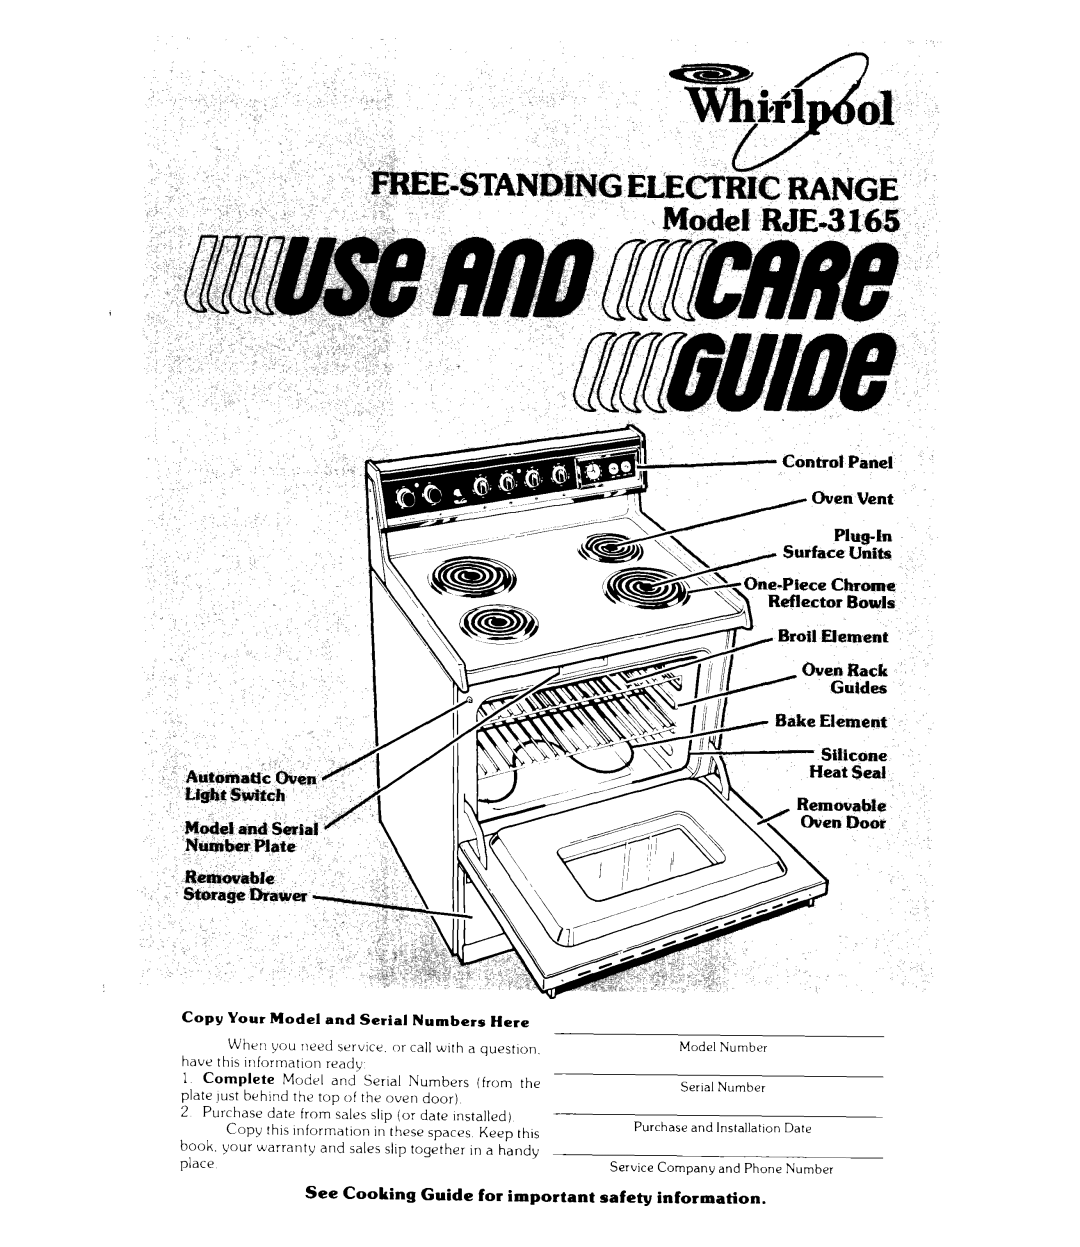 Whirlpool RJE-3165 manual Copy Your Model and Serial Numbers Here 